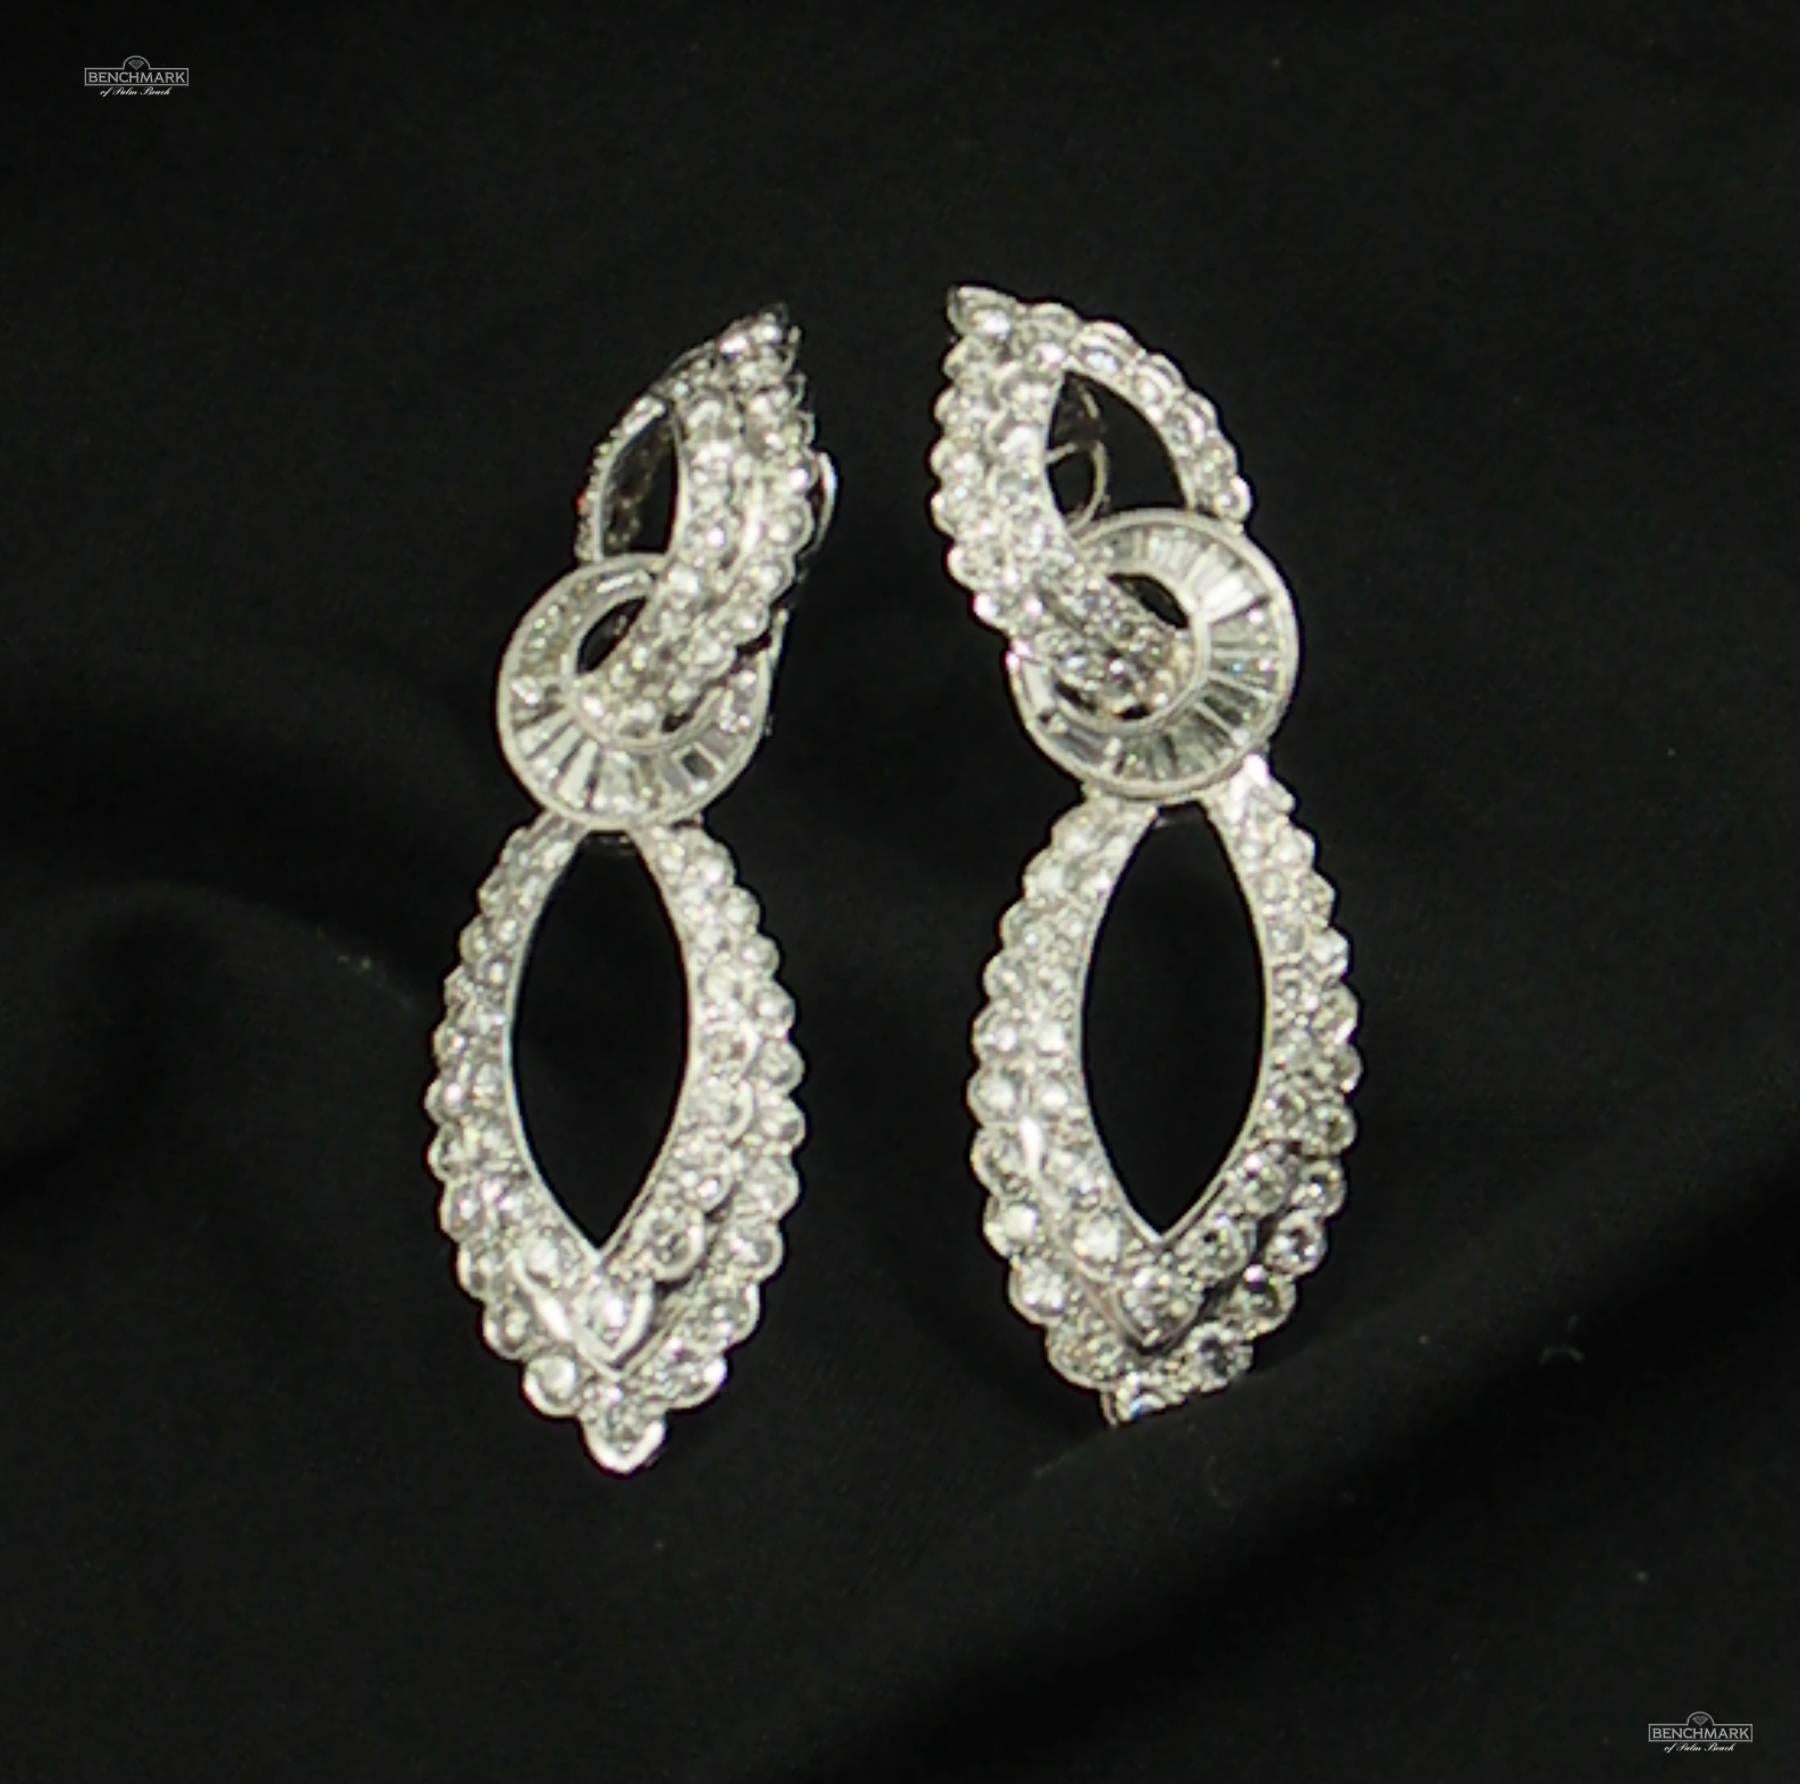 A pair of 18K white gold earrings with an almost Edwardian feel that hang on the ear wonderfully, and are set with round brilliant cut and baguette cut diamonds. They are comprised of a flattering top and bottom set with round diamonds joined by an